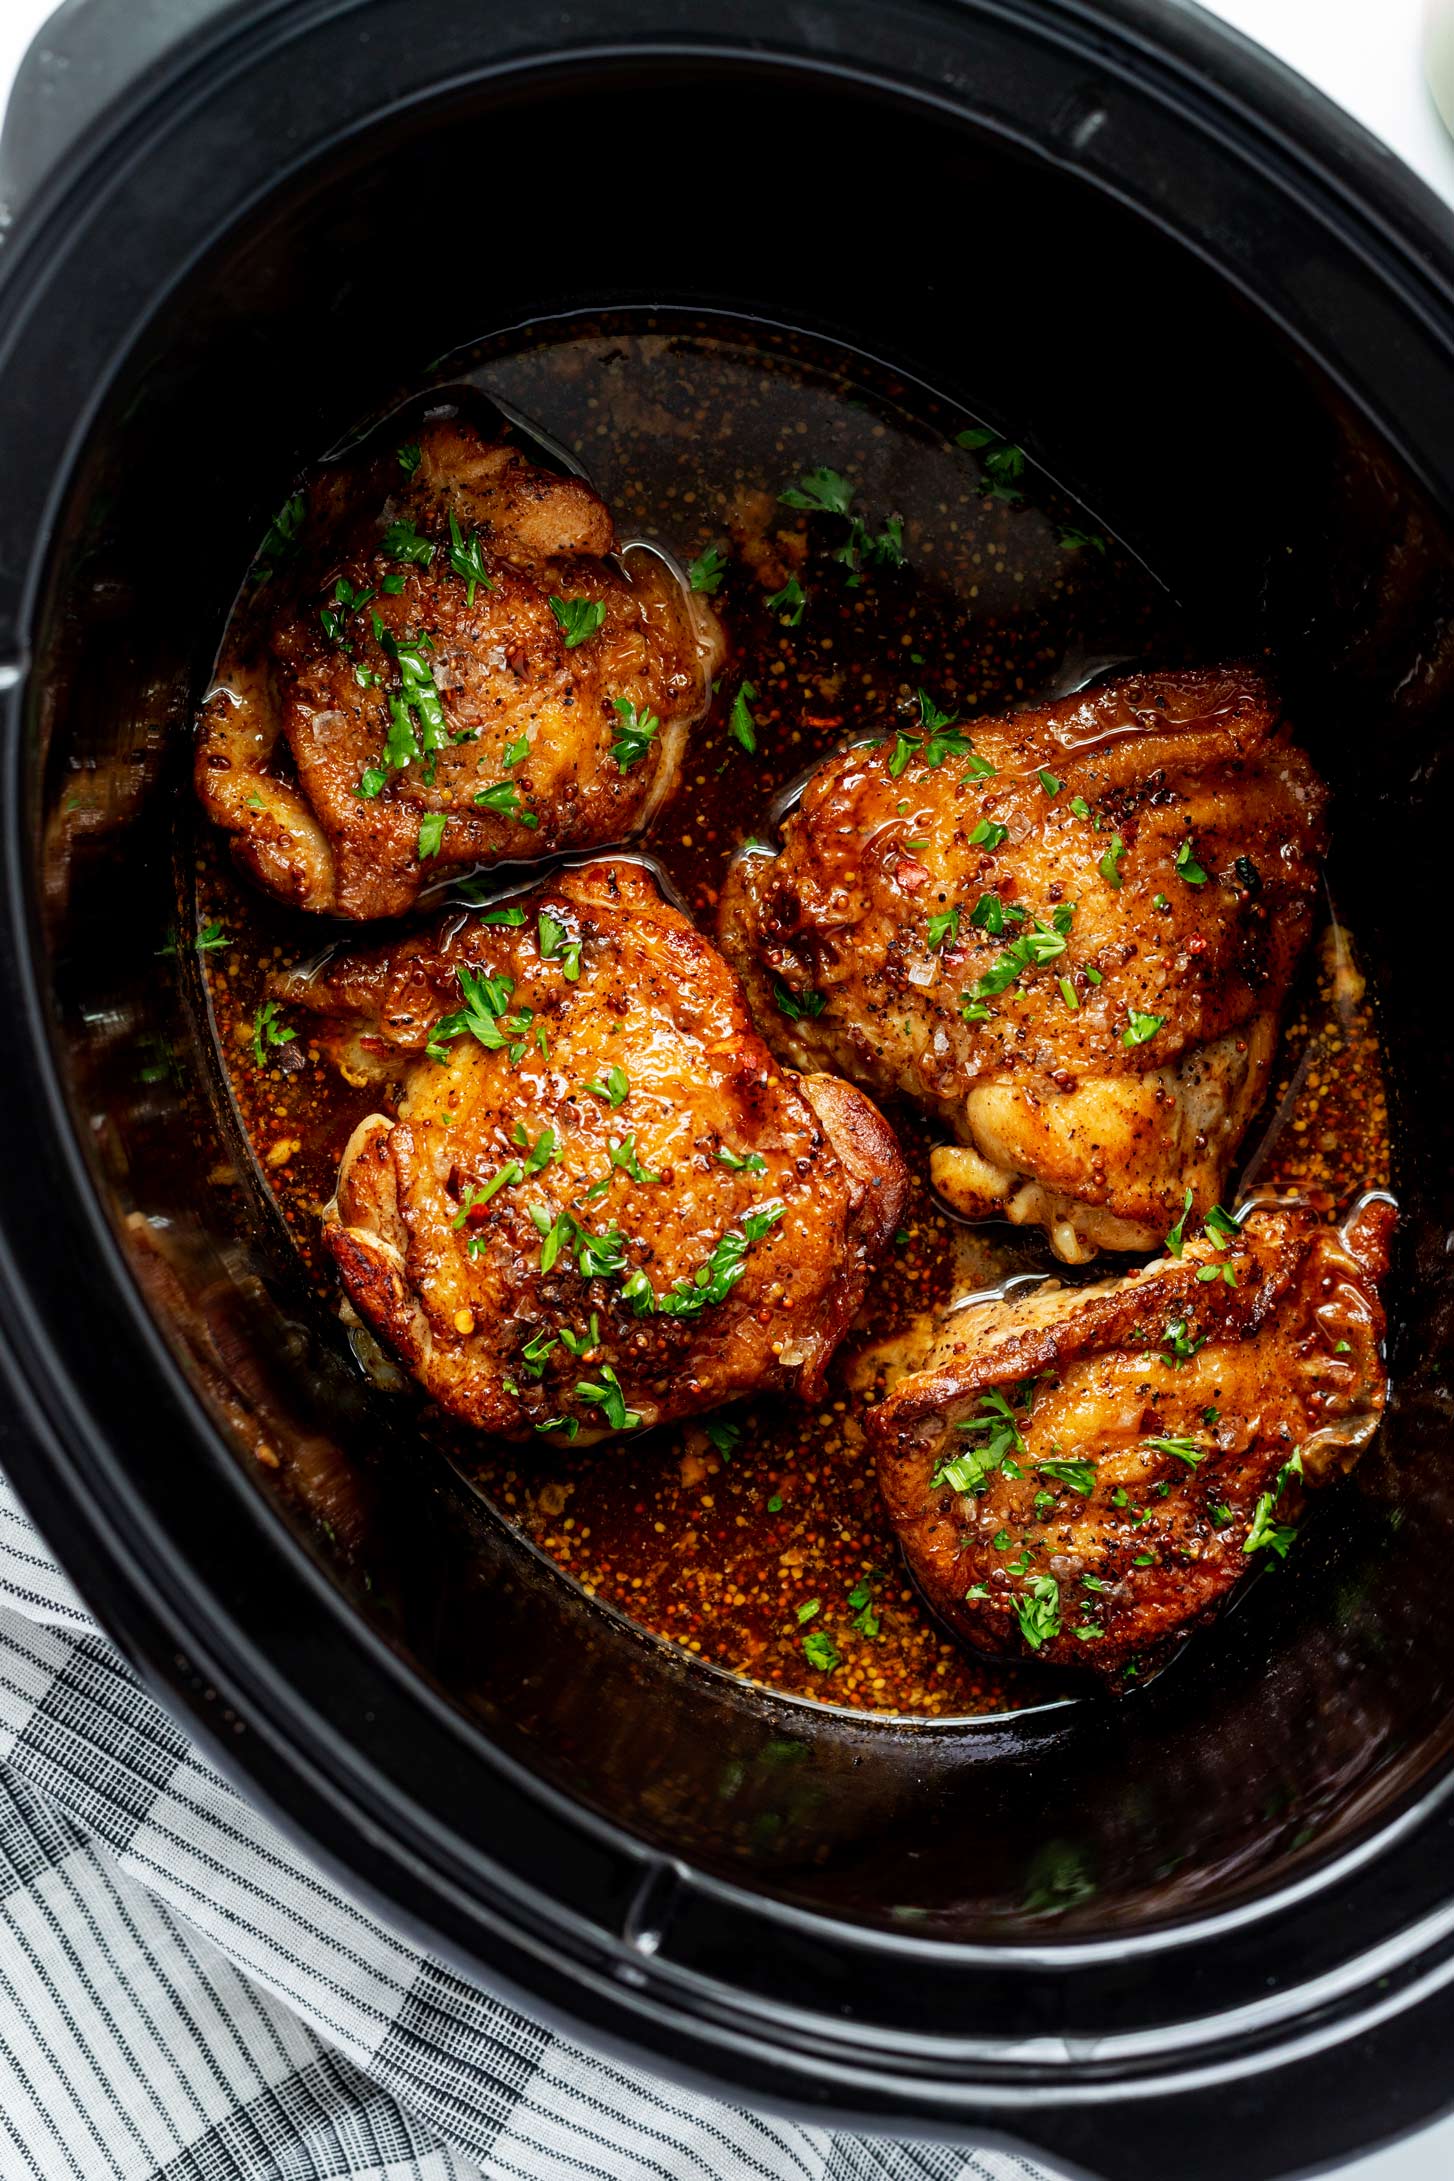 Photo of cooked chicken thighs in a slow cooker.